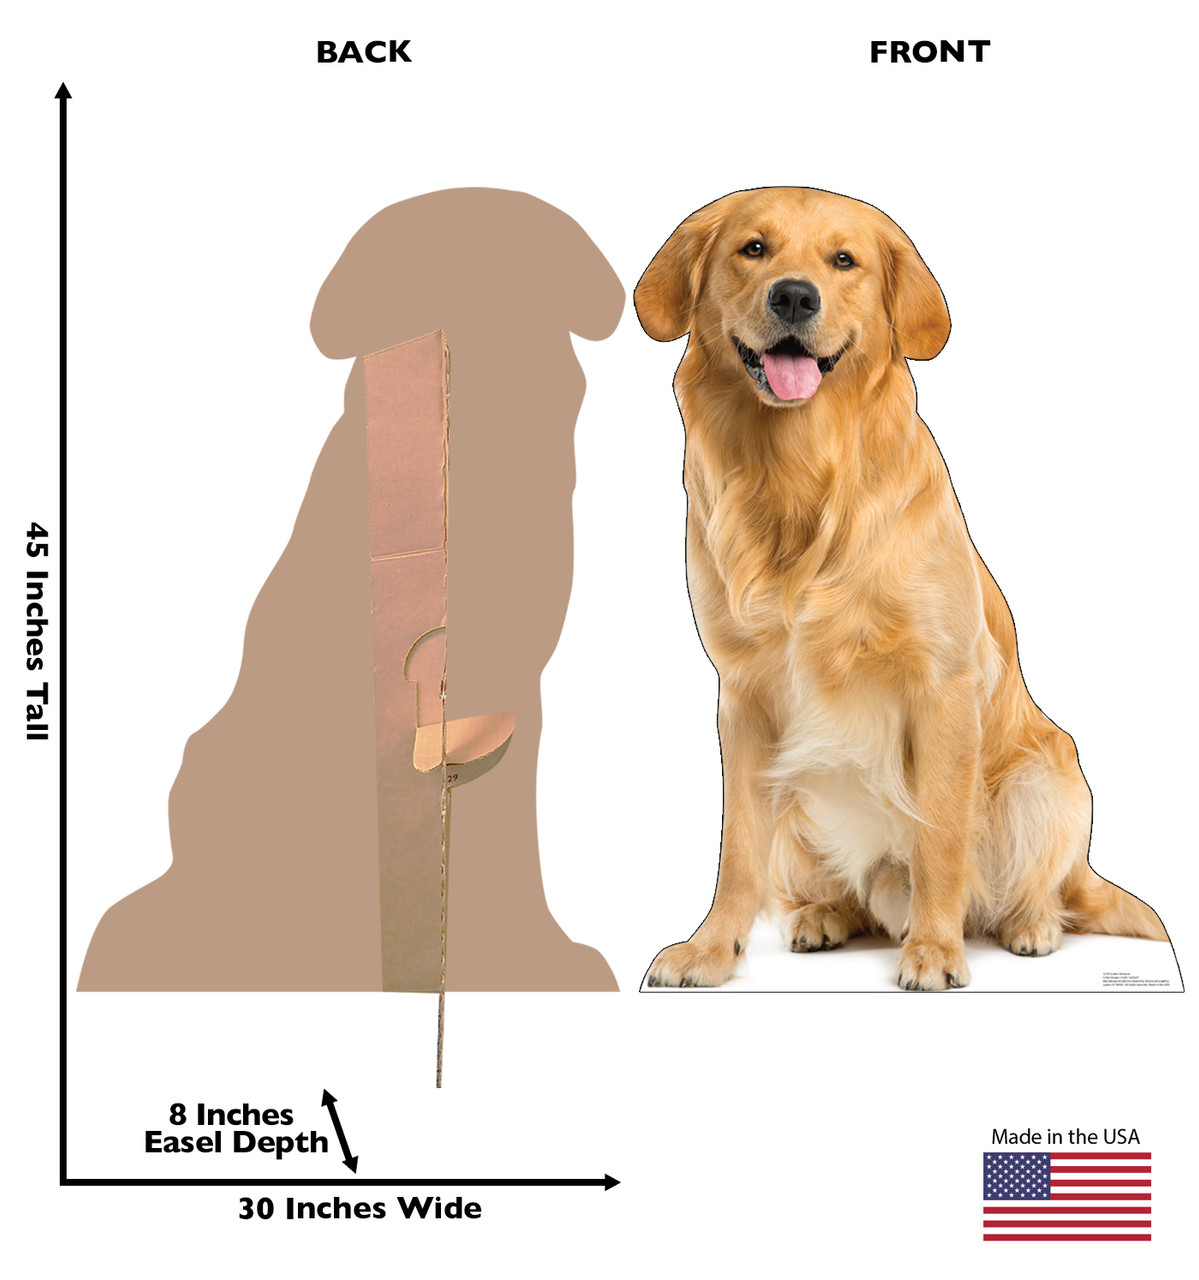 Life-size cardboard standee of a Golden Retriever with back and front dimensions.